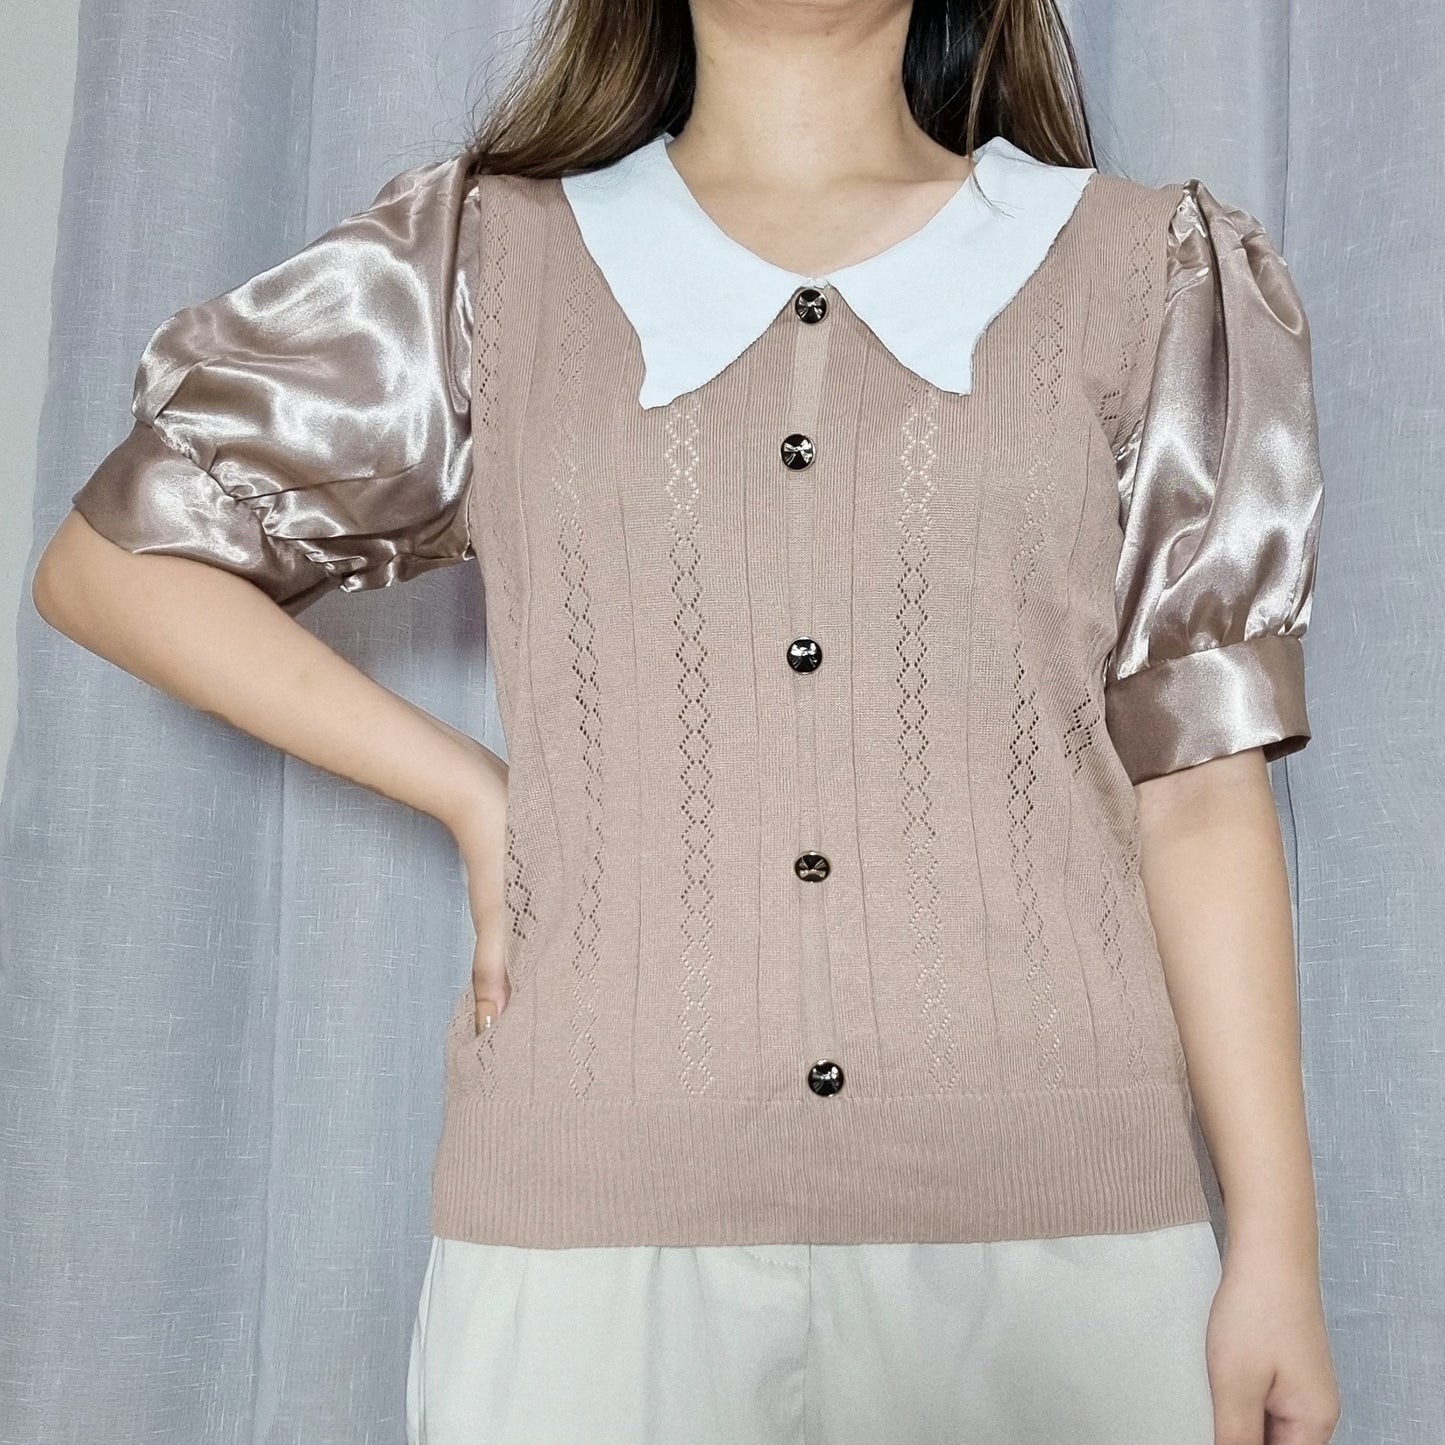 Esther Collared Stretchy Top - Silky Puffed Sleeves  Blouse